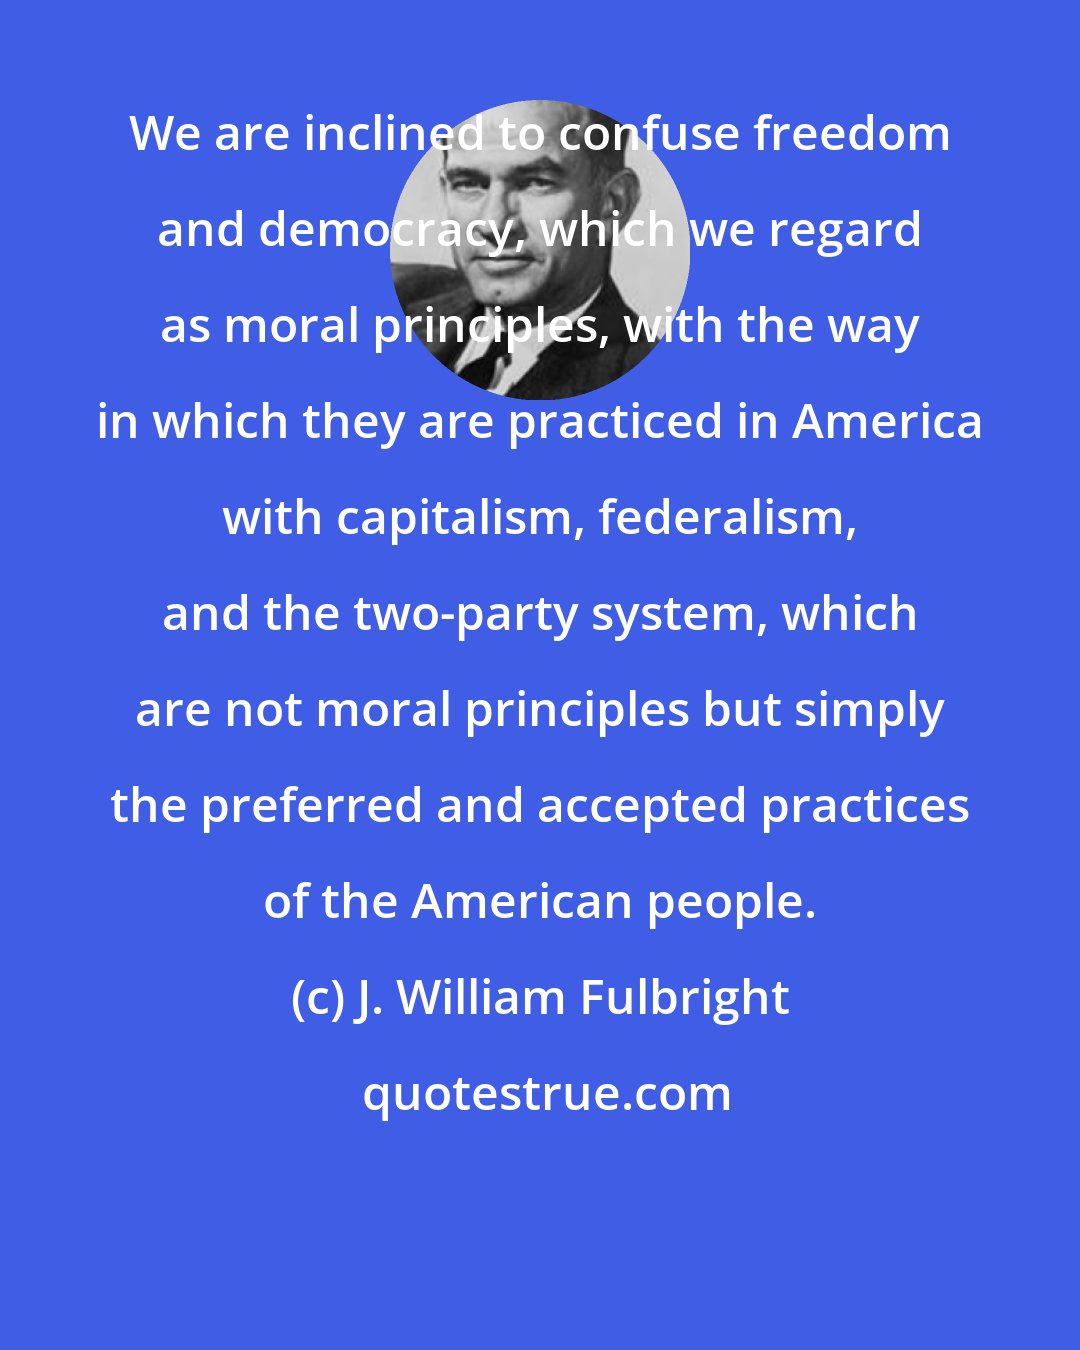 J. William Fulbright: We are inclined to confuse freedom and democracy, which we regard as moral principles, with the way in which they are practiced in America with capitalism, federalism, and the two-party system, which are not moral principles but simply the preferred and accepted practices of the American people.